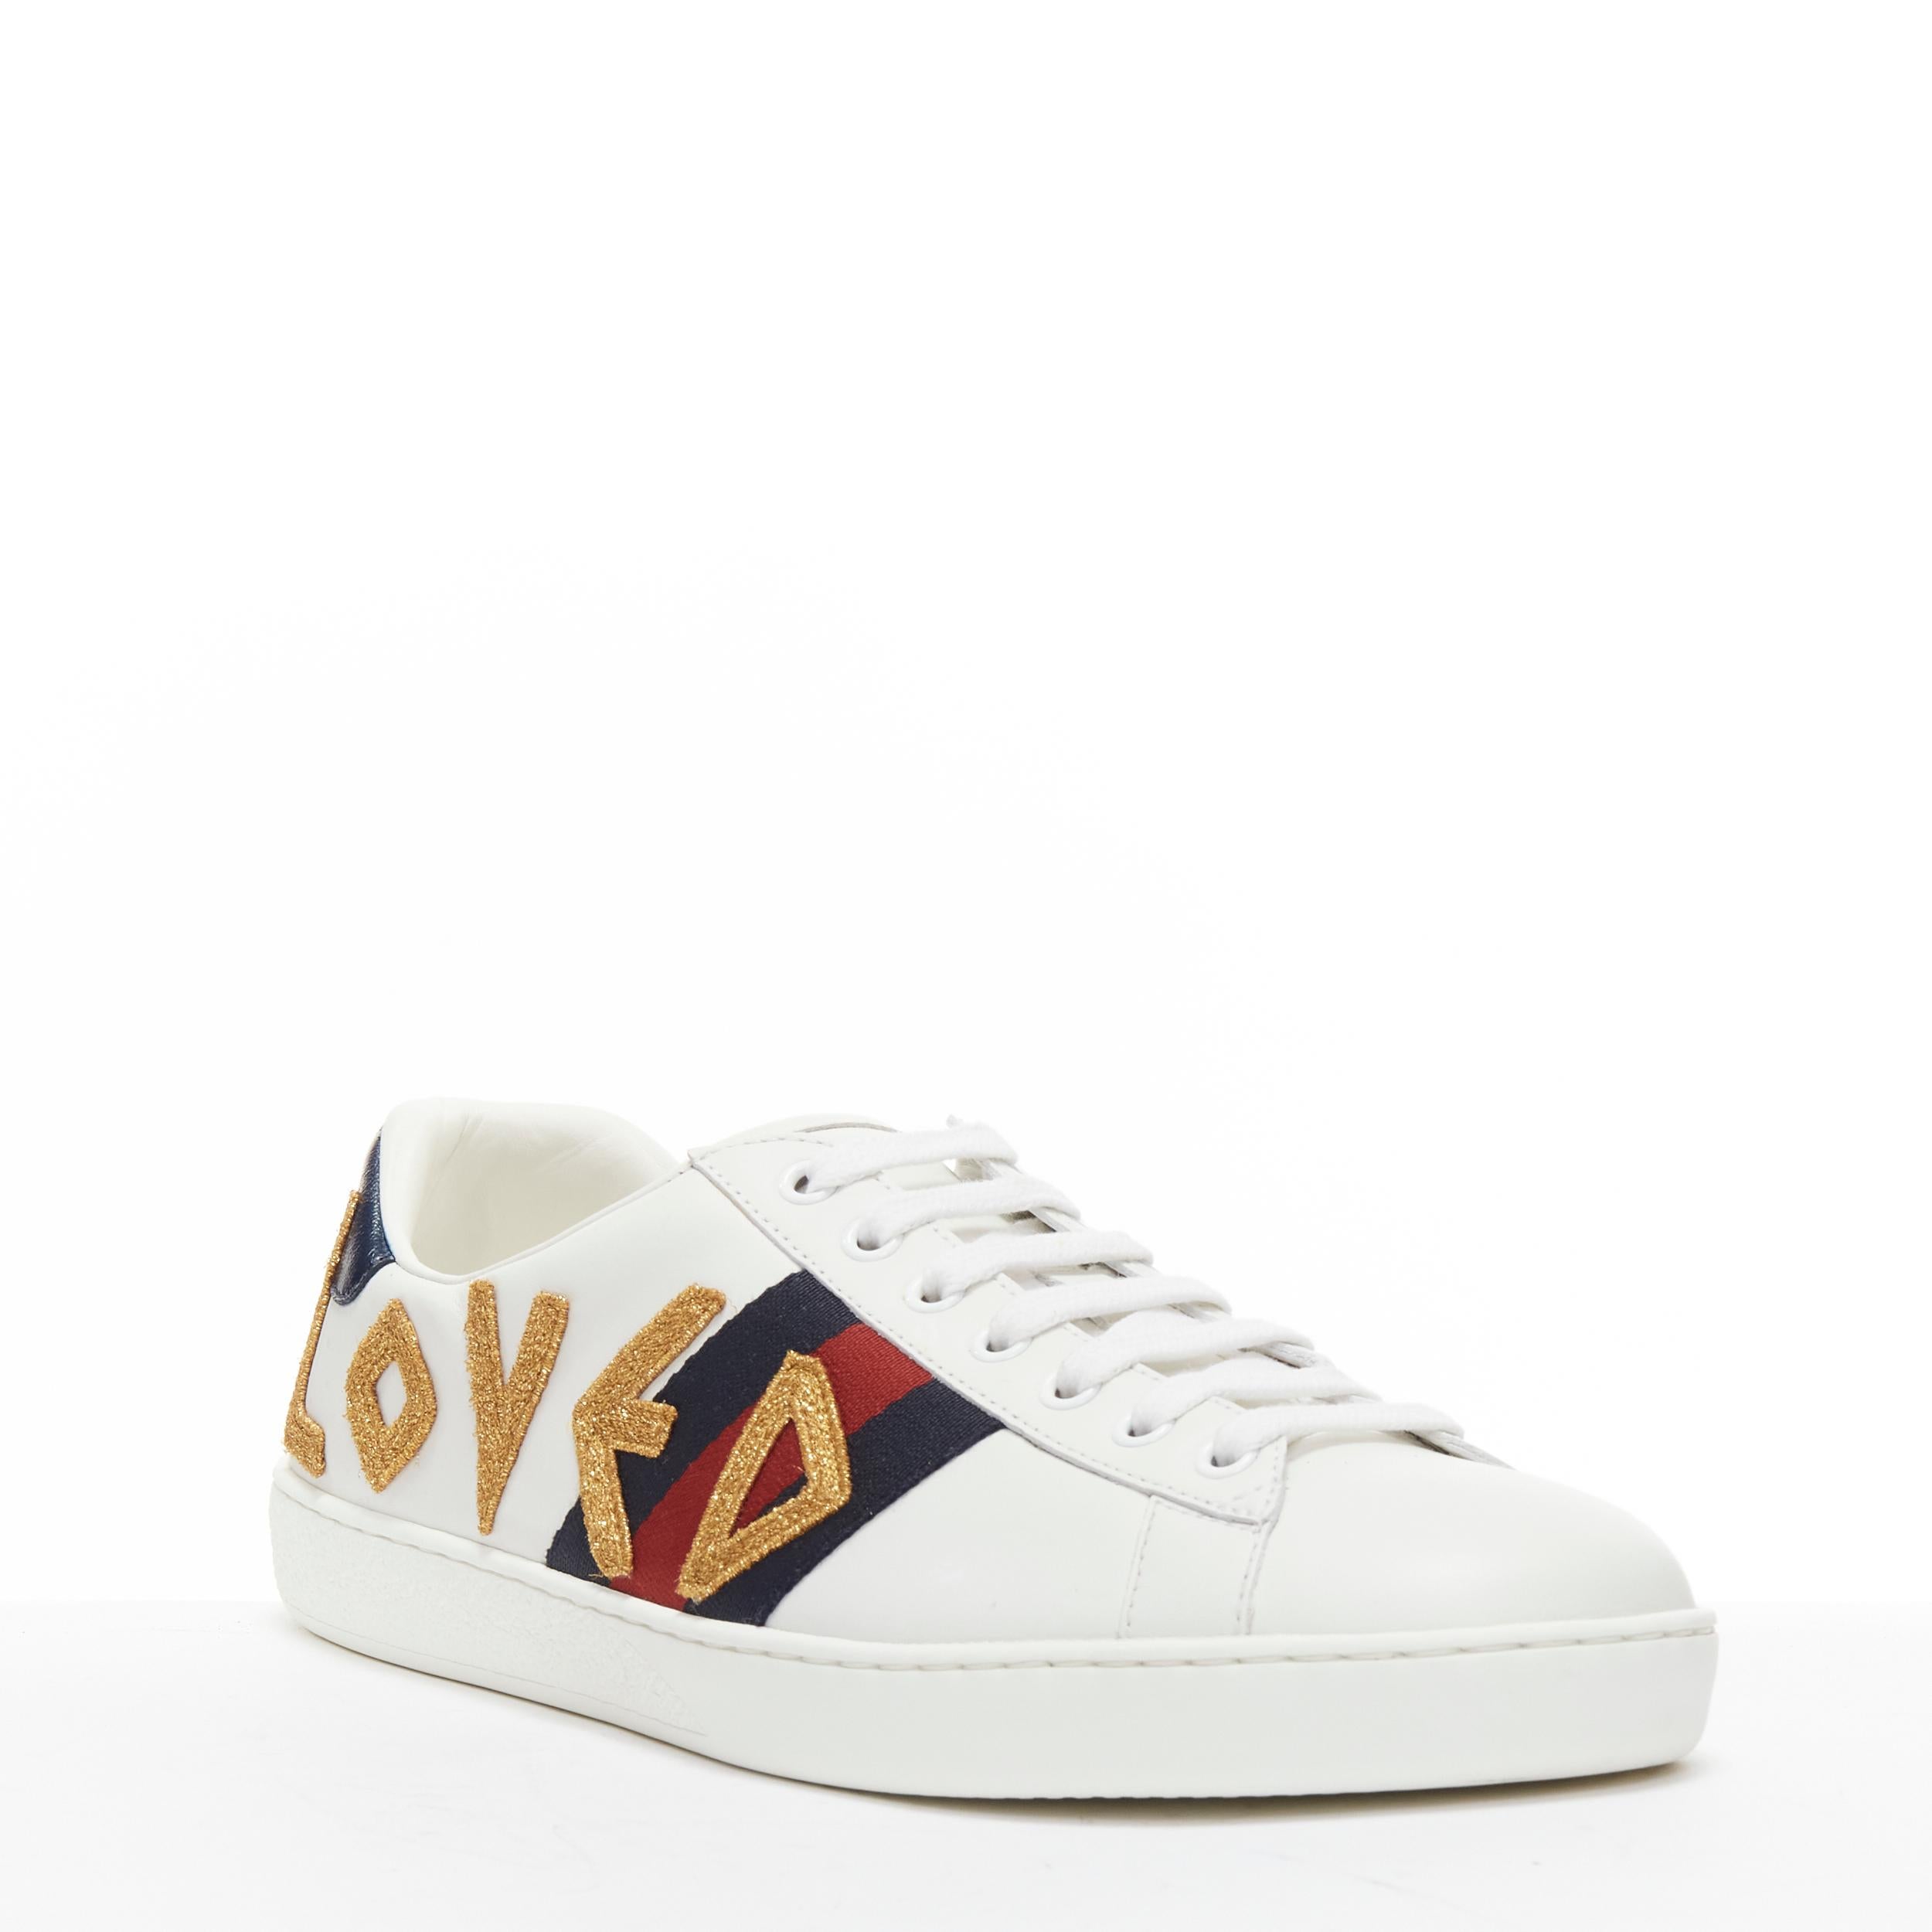 Beige GUCCI Ace Loved gold embroidered blue red web leather sneakers UK7 EU41 For Sale